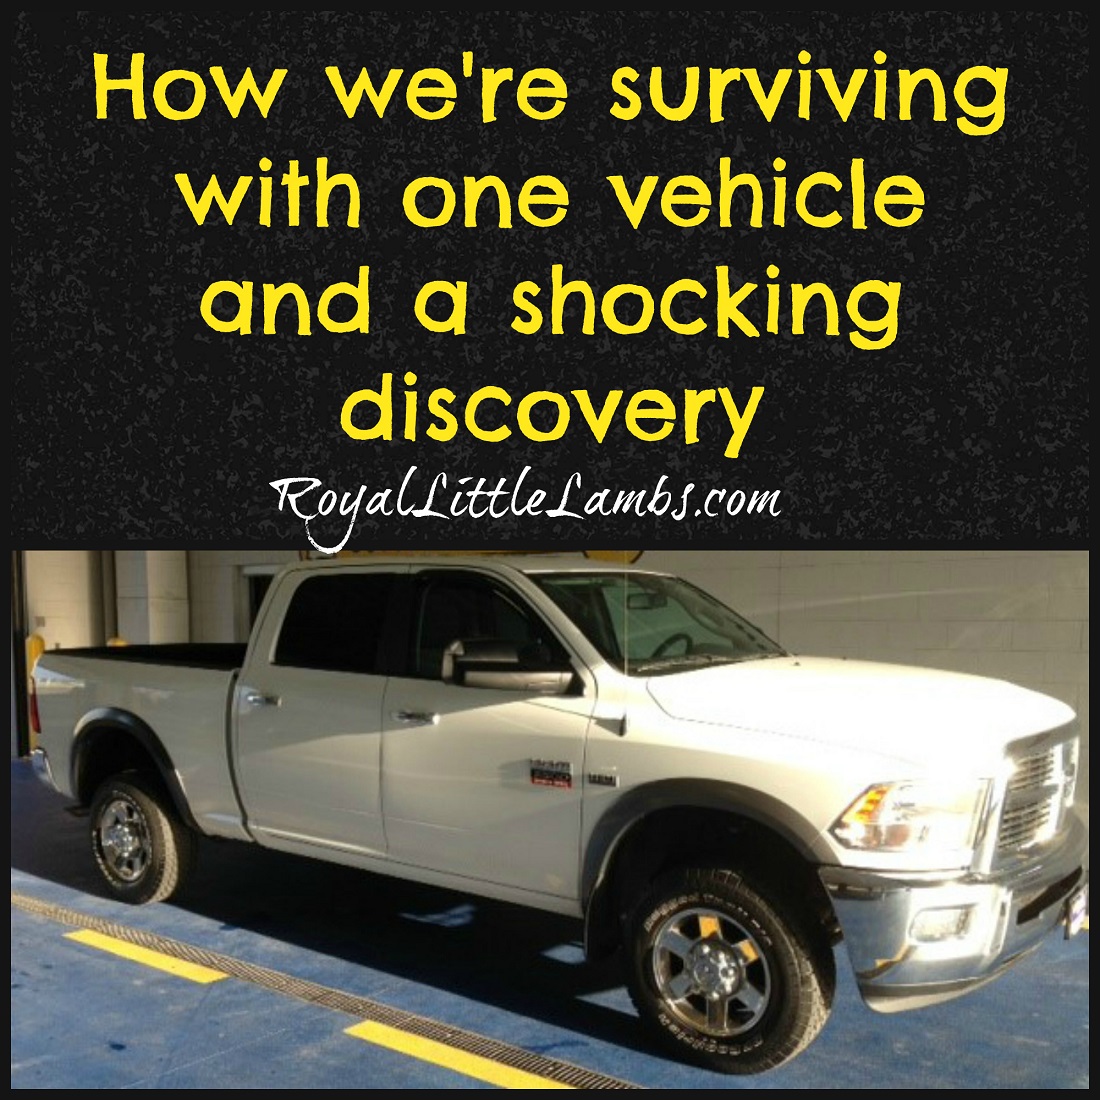 How we're surviving with one vehicle